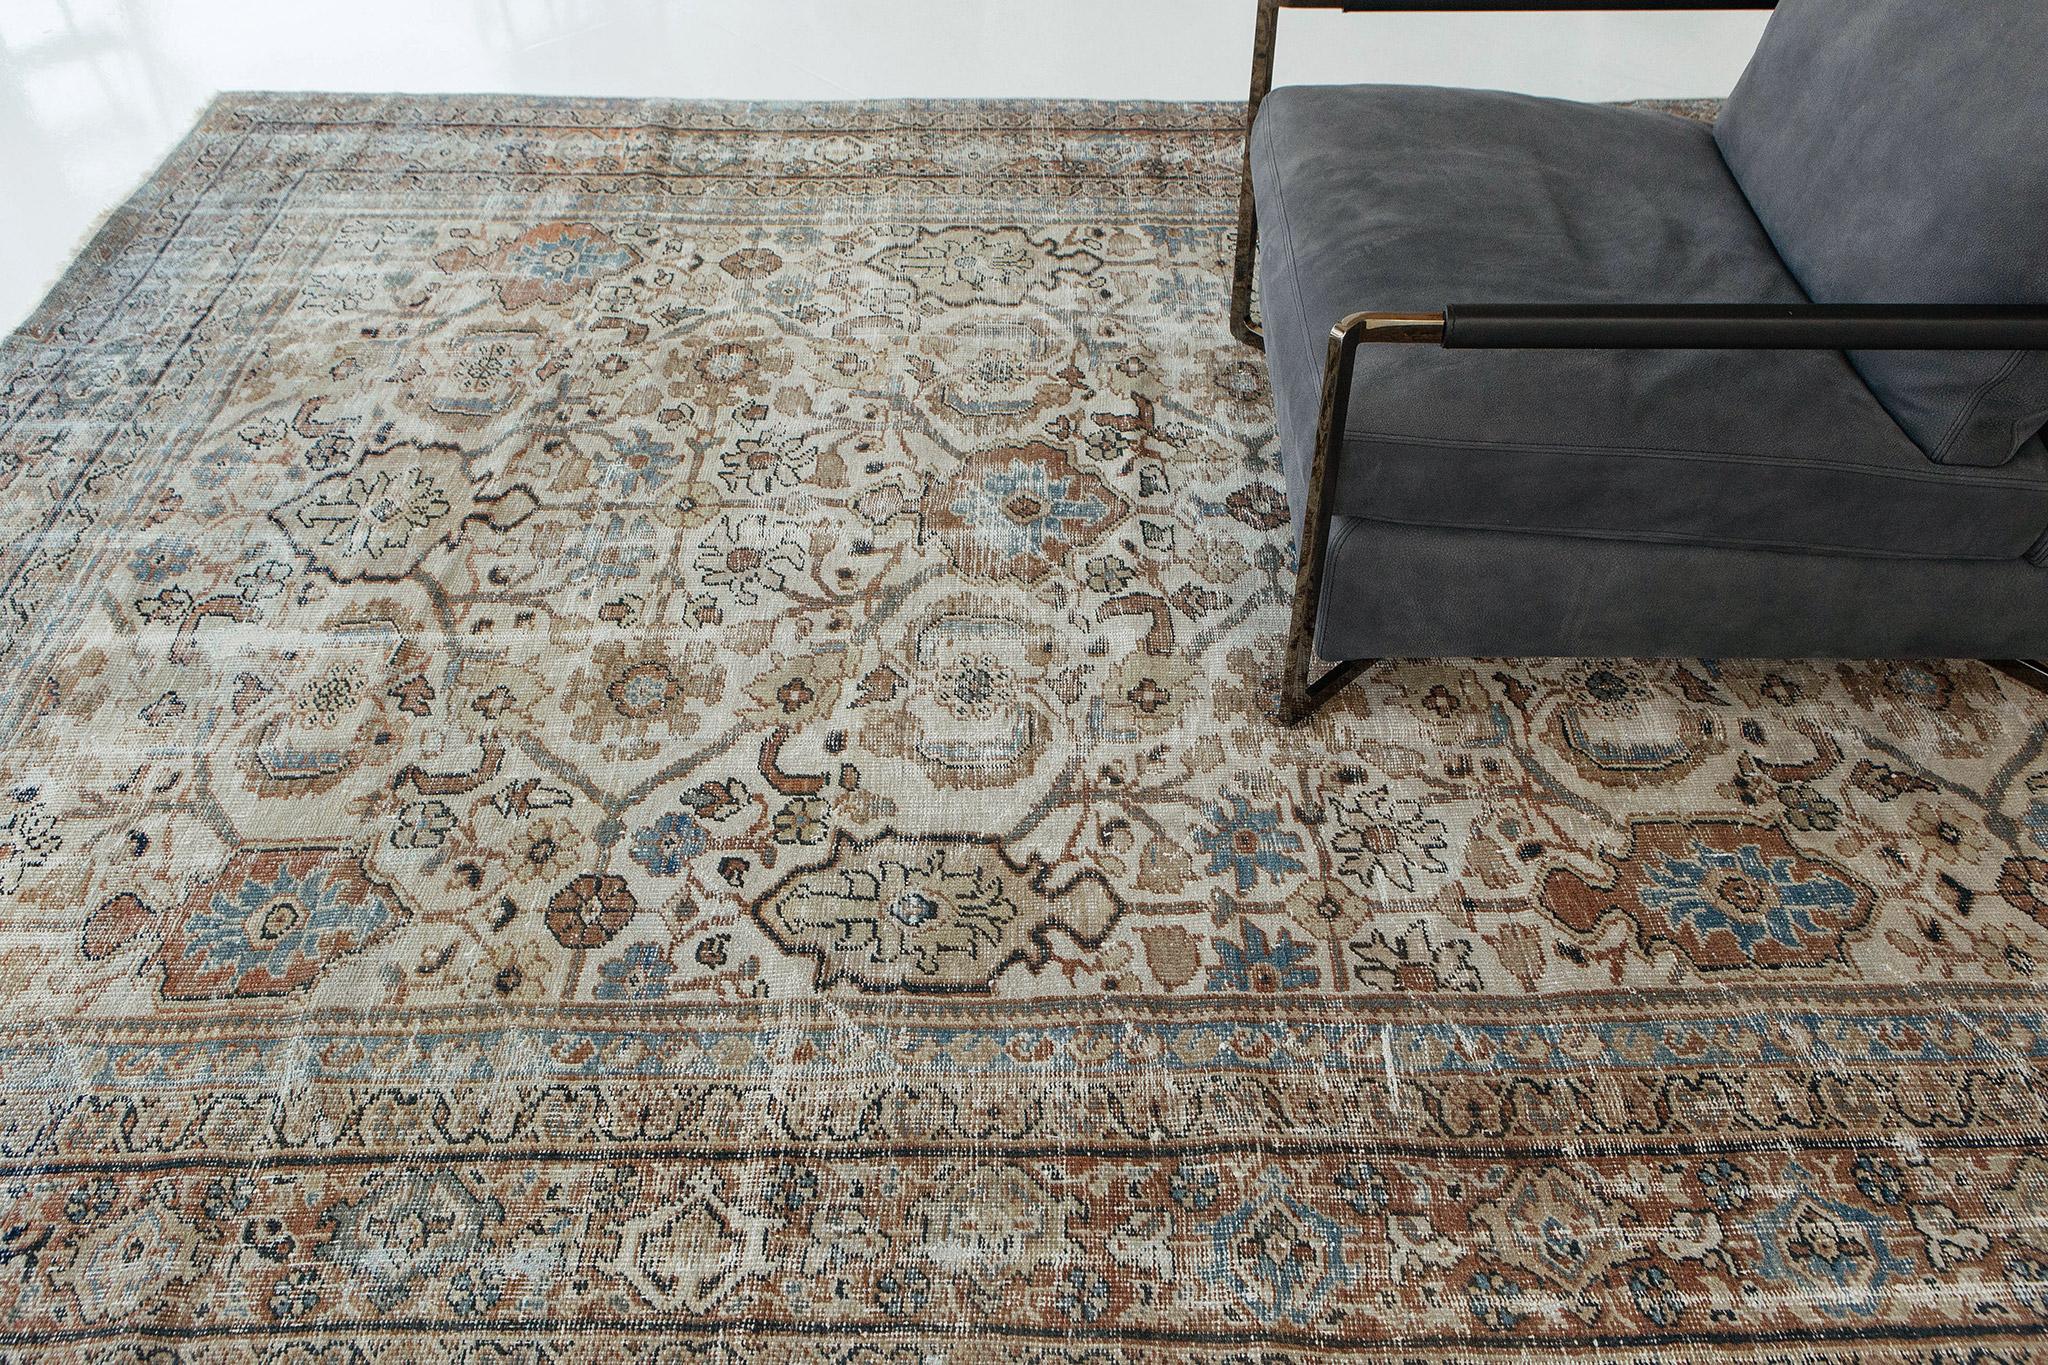 This rugs time-softened color palette combined with a highly industrial aesthetic highlight a medley of intricately composed geometric motifs creating a rhythmic, majestic cadence throughout its weathered composition. The borders are harmoniously